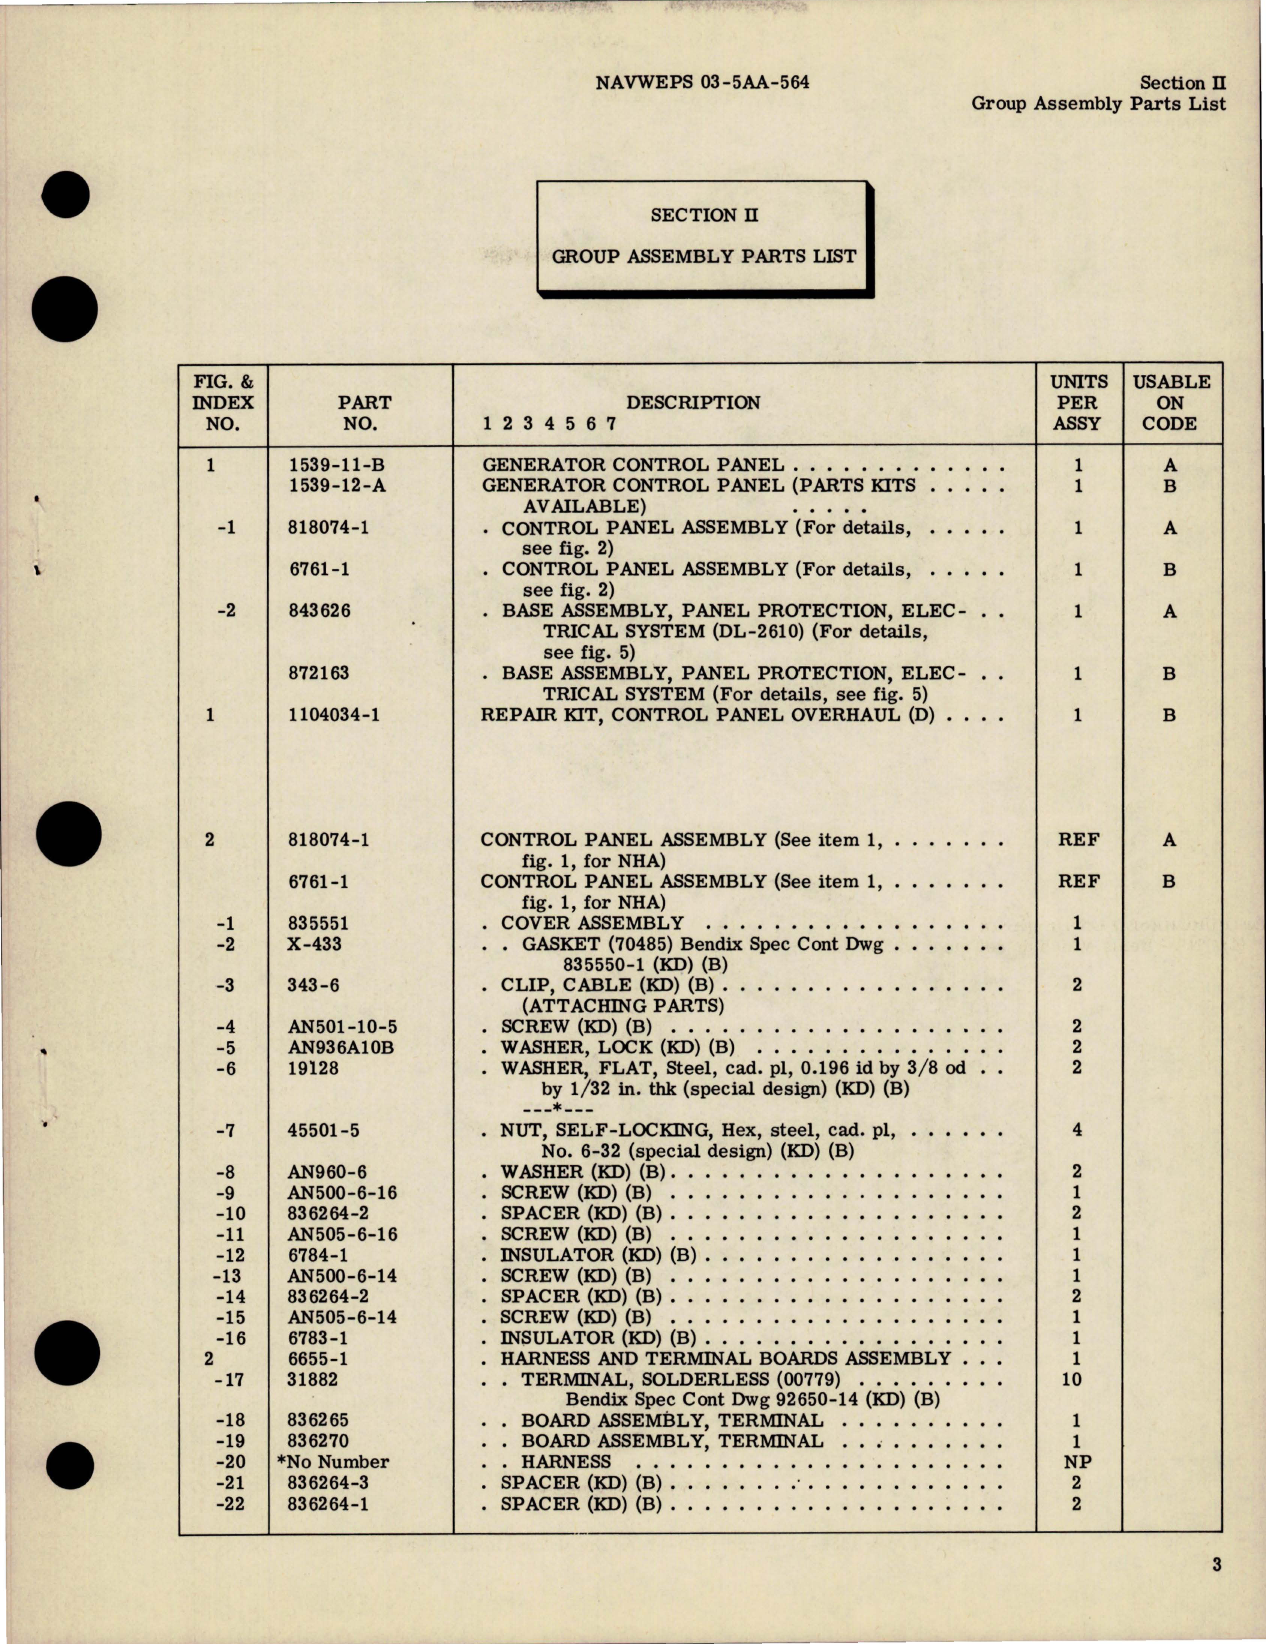 Sample page 5 from AirCorps Library document: Illustrated Parts Breakdown for Generator Control Panel - Types 1539-11-B and 1539-12-A 